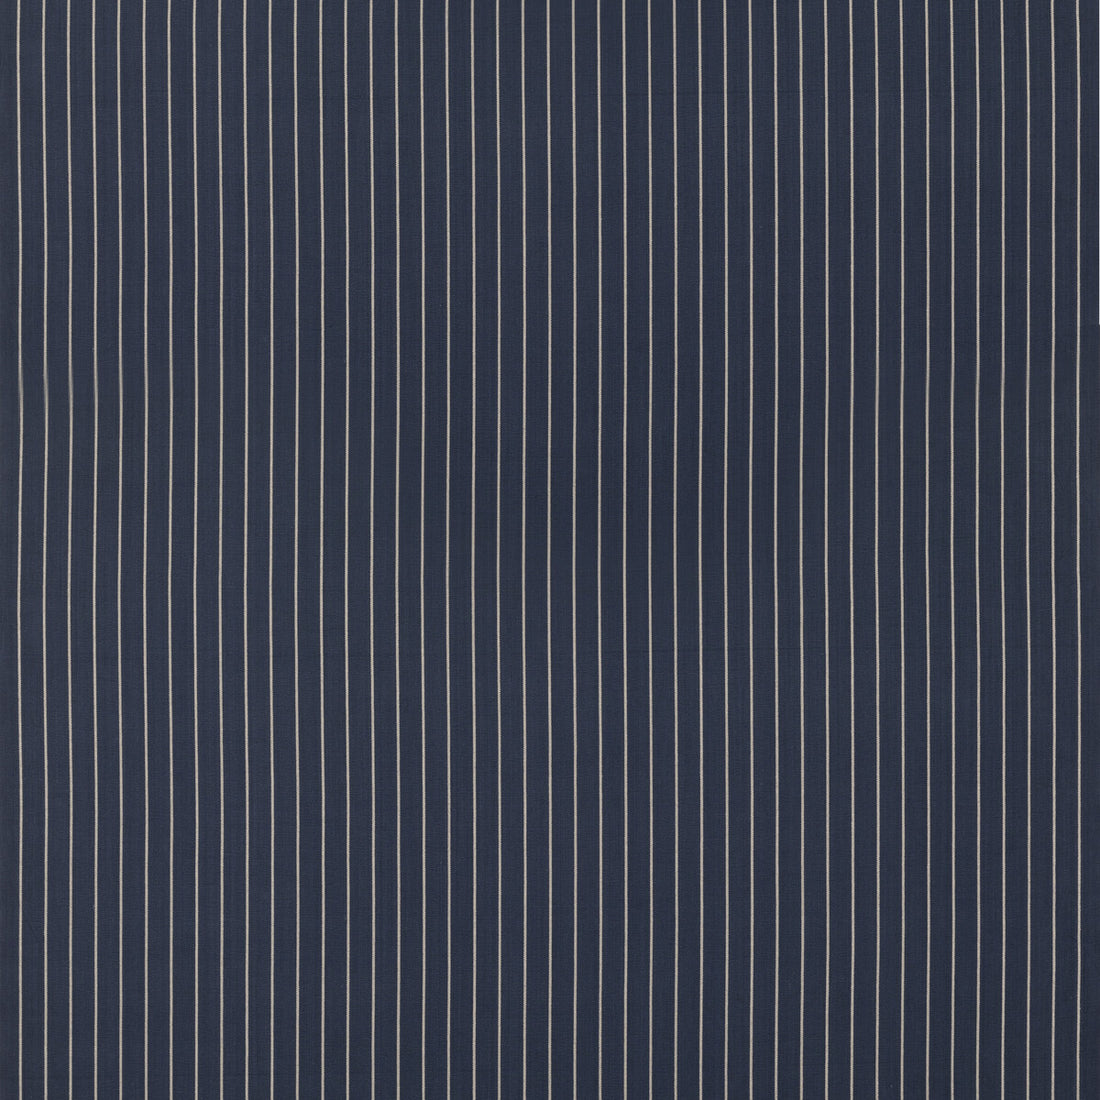 Shoreham Stripe fabric in indigo color - pattern FD818.H10.0 - by Mulberry in the Westerly Stripes collection